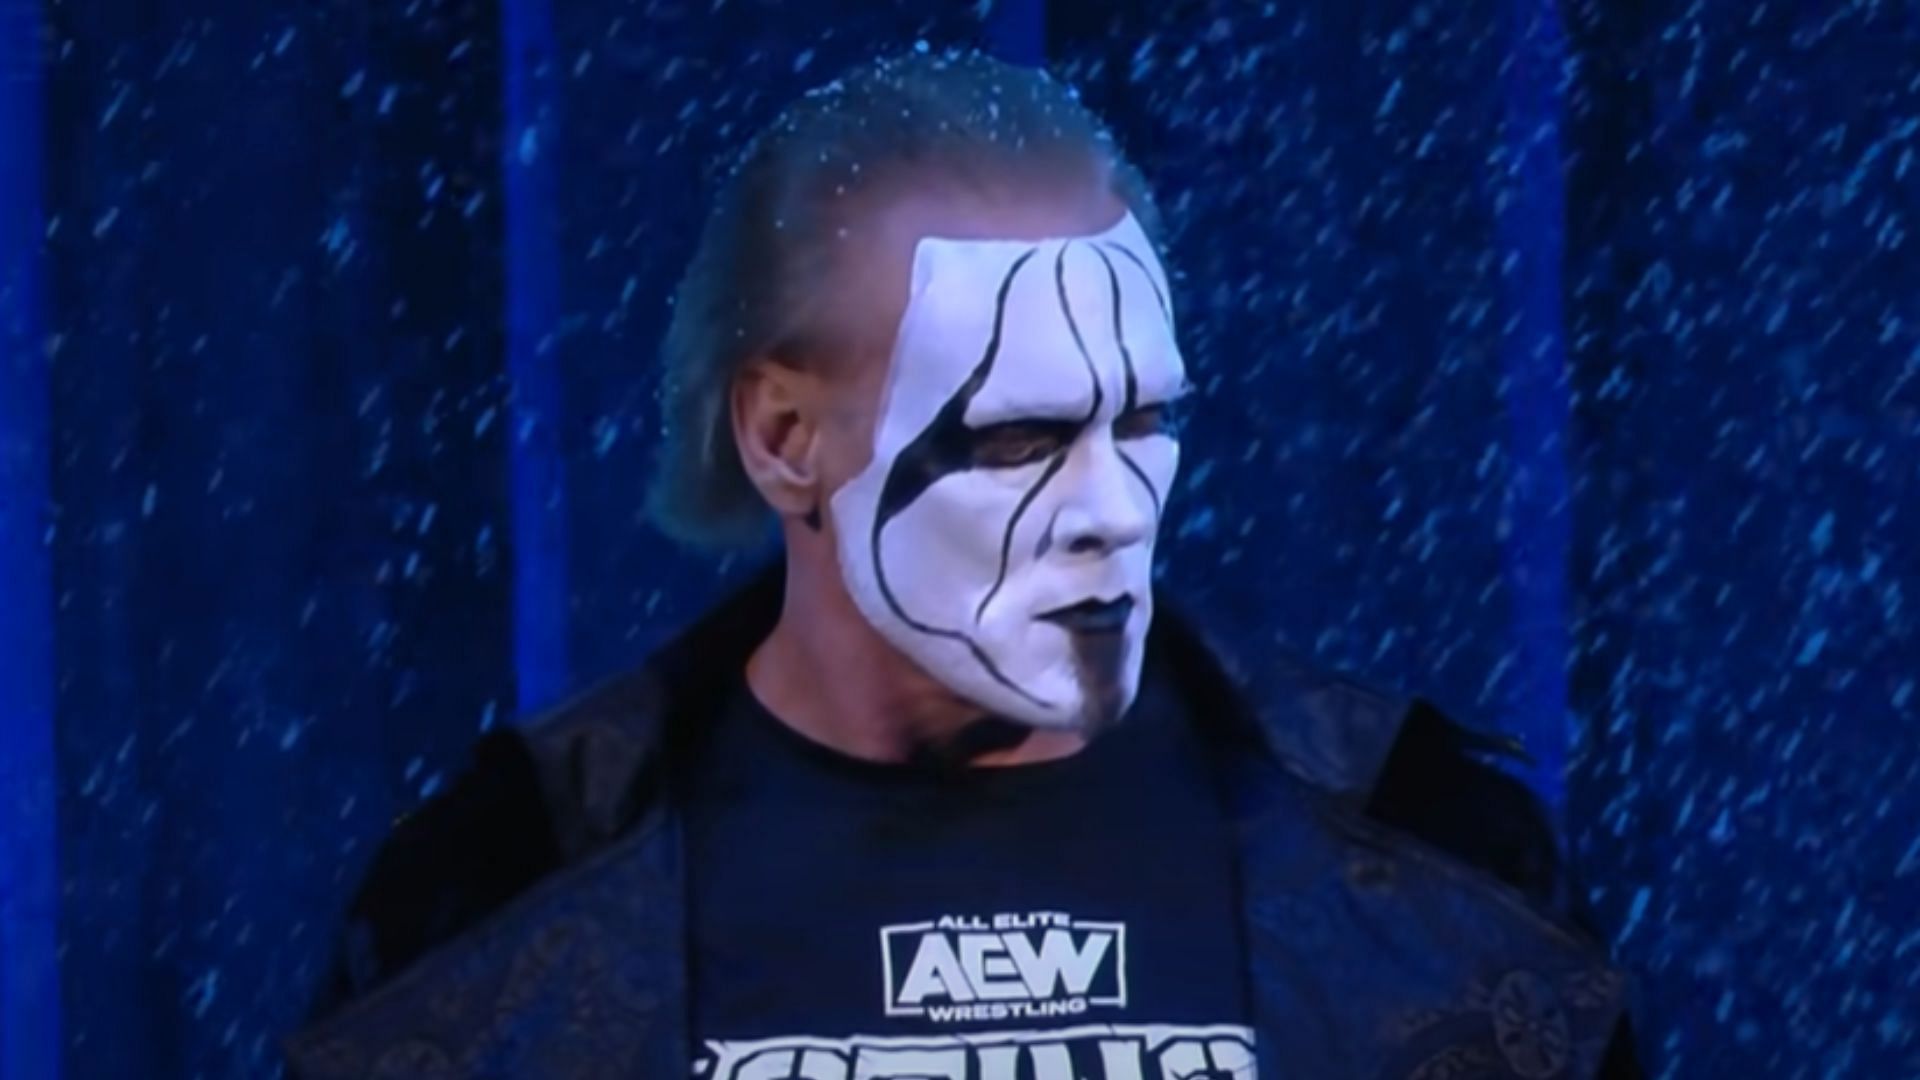 Sting is a co-holder of the AEW World Tag Team Titles [Image Credits: AEW